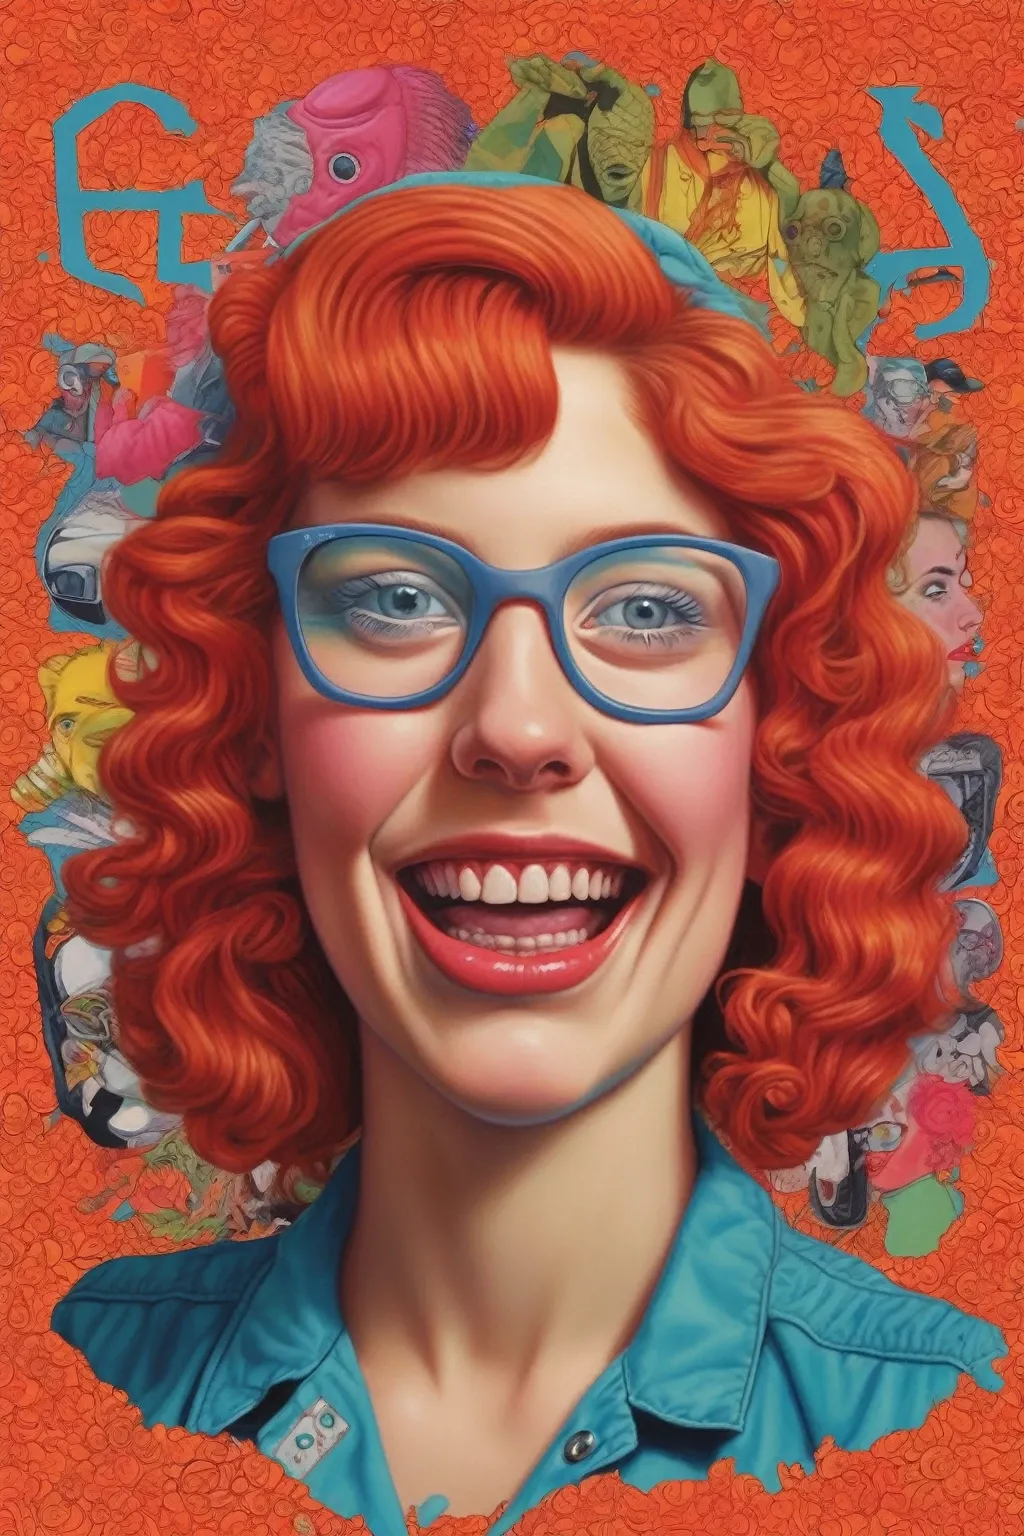 Alex Gross Style - pintura de Alex Gross The image you've uploaded appears to be inspired by the cover art of an album (let's talk about feelings) by LAGWAGON hardcore punk band, featuring a stylized and colorful portrait with a retro graphic design background. The character is a girl depicted with a vibrant, friendly smile, curly red hair, and glasses, set against a bright and bold patterned background that includes text. It carries a strong 90s punk rock aesthetic, reminiscent of album cover art from bands of that era, combining a quirky and expressive portrait with eye-catching typography.